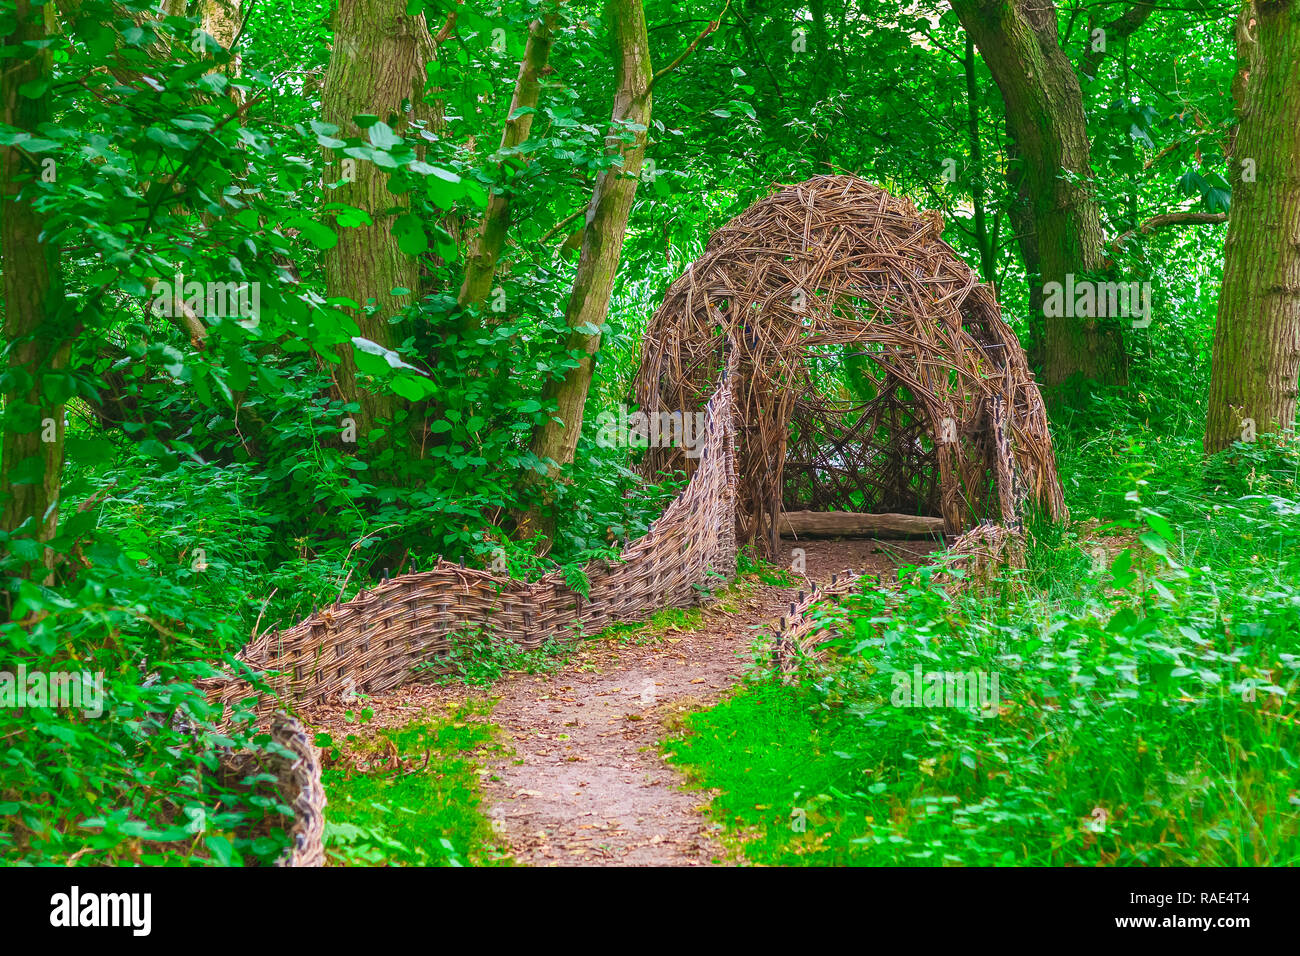 Primitive Bushcraft Shelter In The Forest With A Campfire Inside Stock  Photo - Download Image Now - iStock